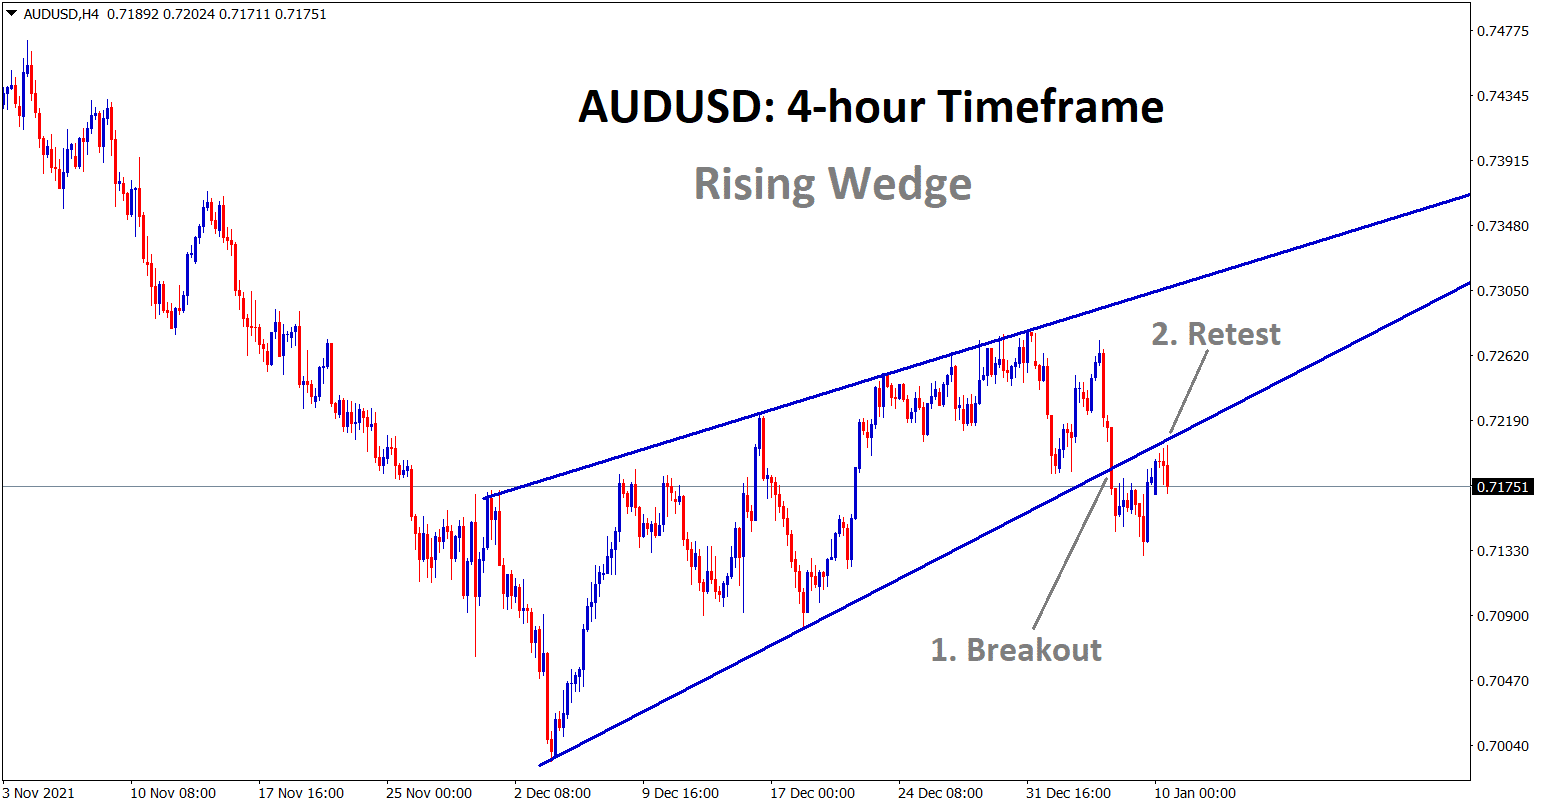 Rising Wedge breakout pattern found on AUDUSD 4 hour timeframe